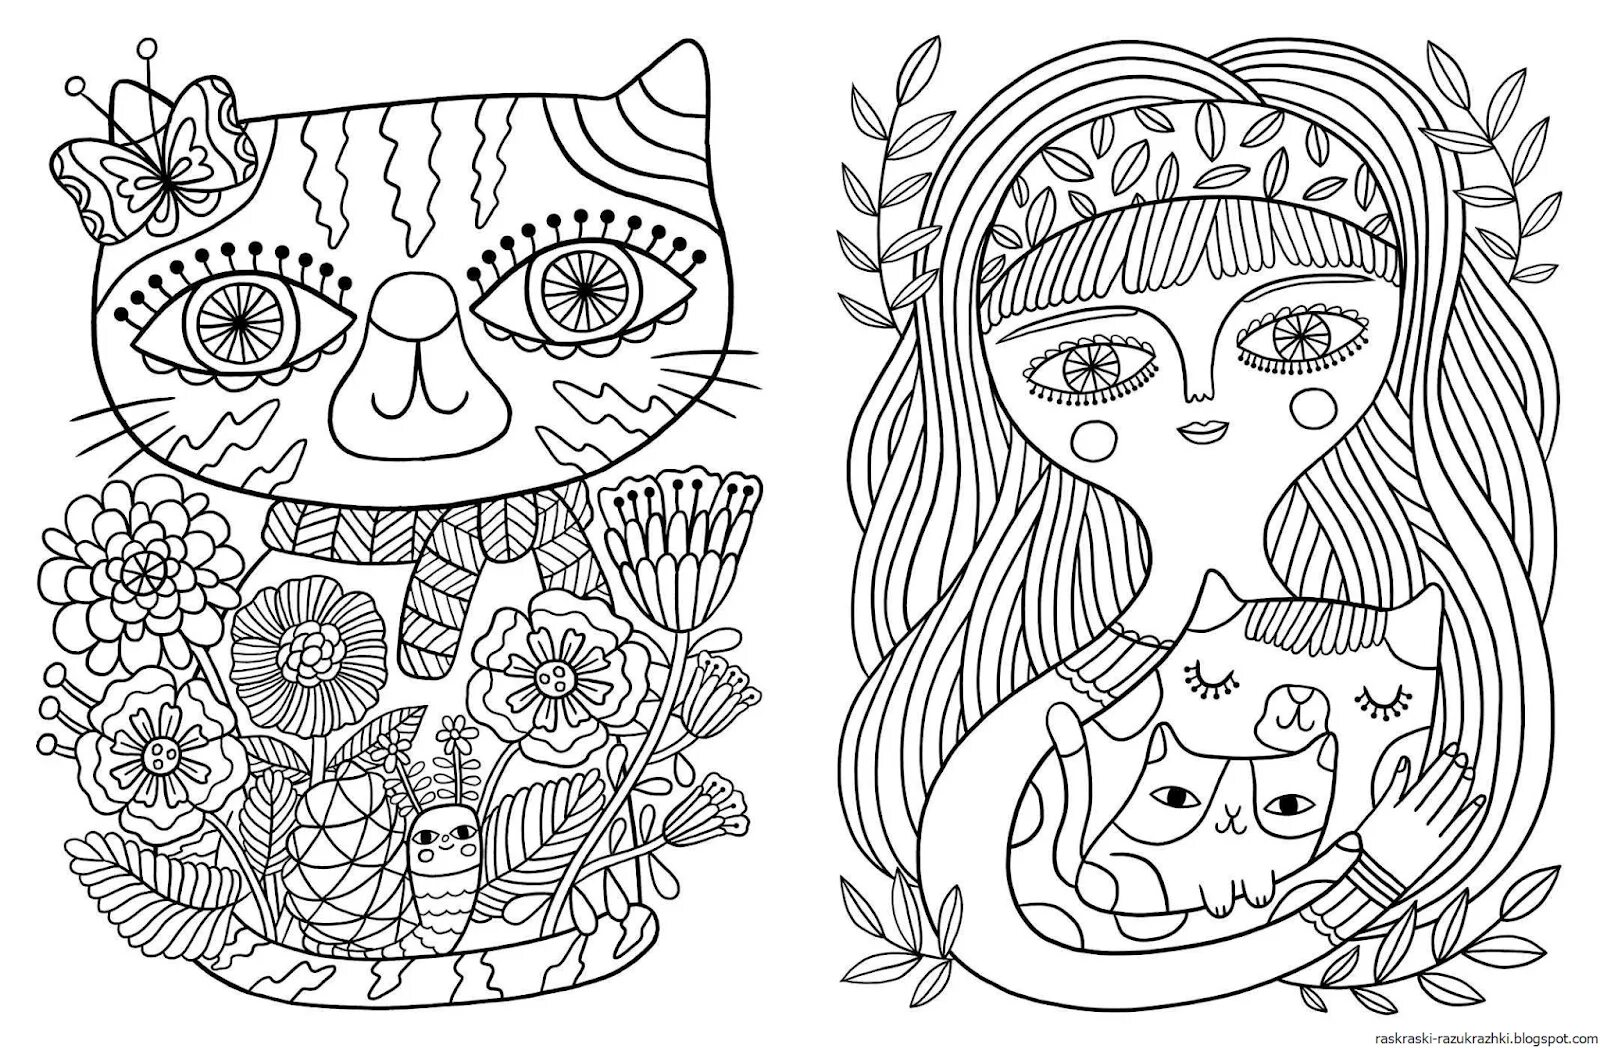 Hypnotic anti-stress coloring book for teenagers